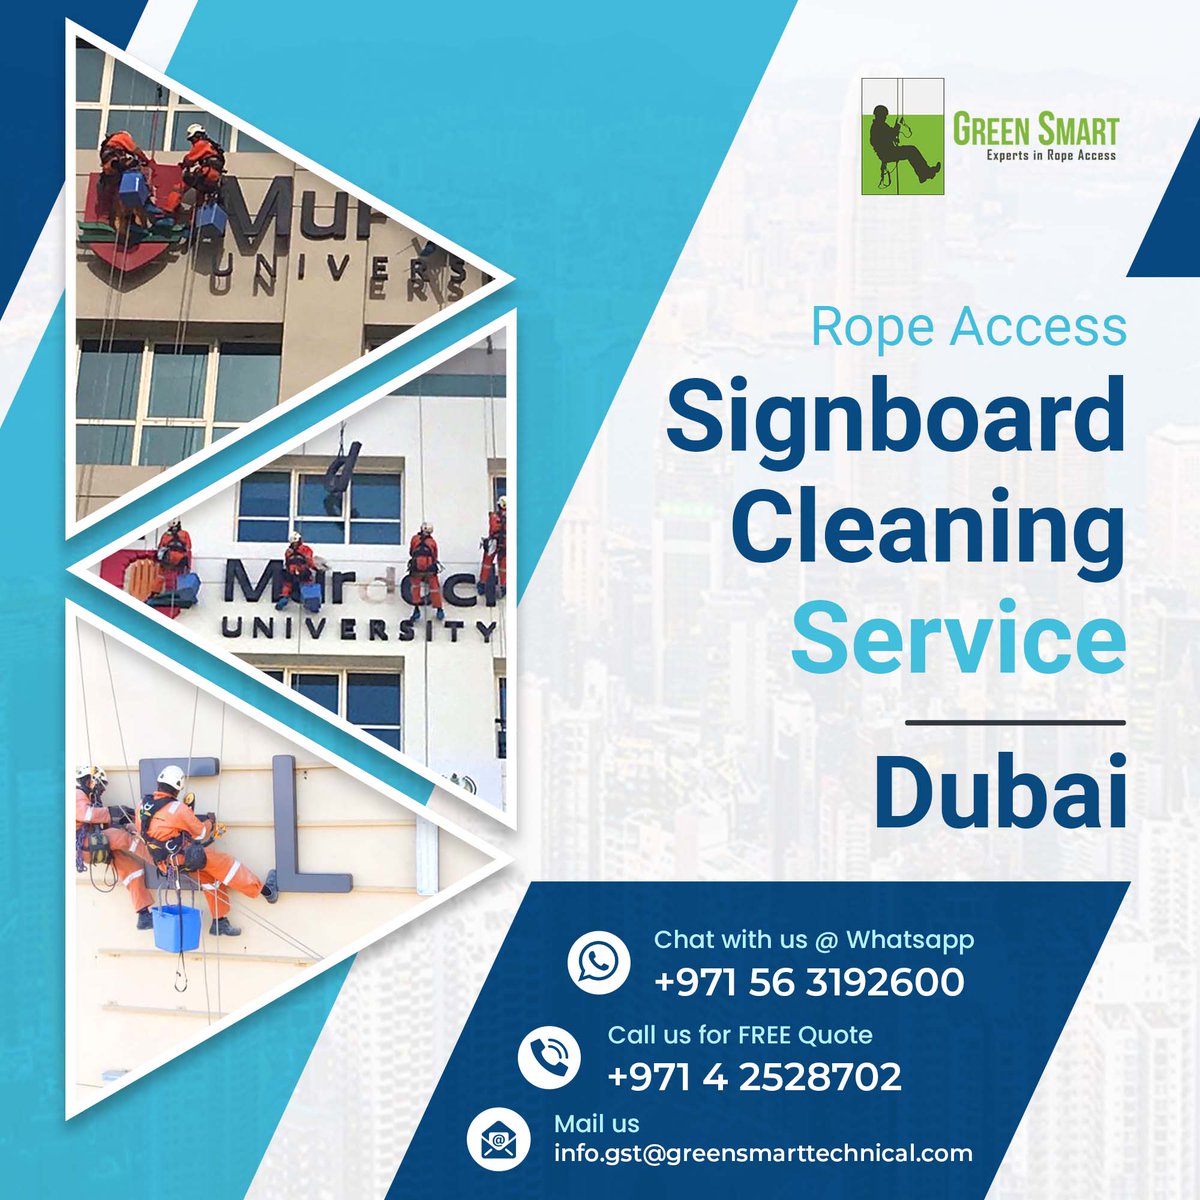 Rope Access Signboards Cleaning Service Dubai 🇦🇪

Make your business stand out with perfect signboards! #GreenSmartTechnical's rope access technicians are ready to offer excellent #signboardinstallation and #cleaningservices. 
🌐greensmarttechnical.com/services/signb…